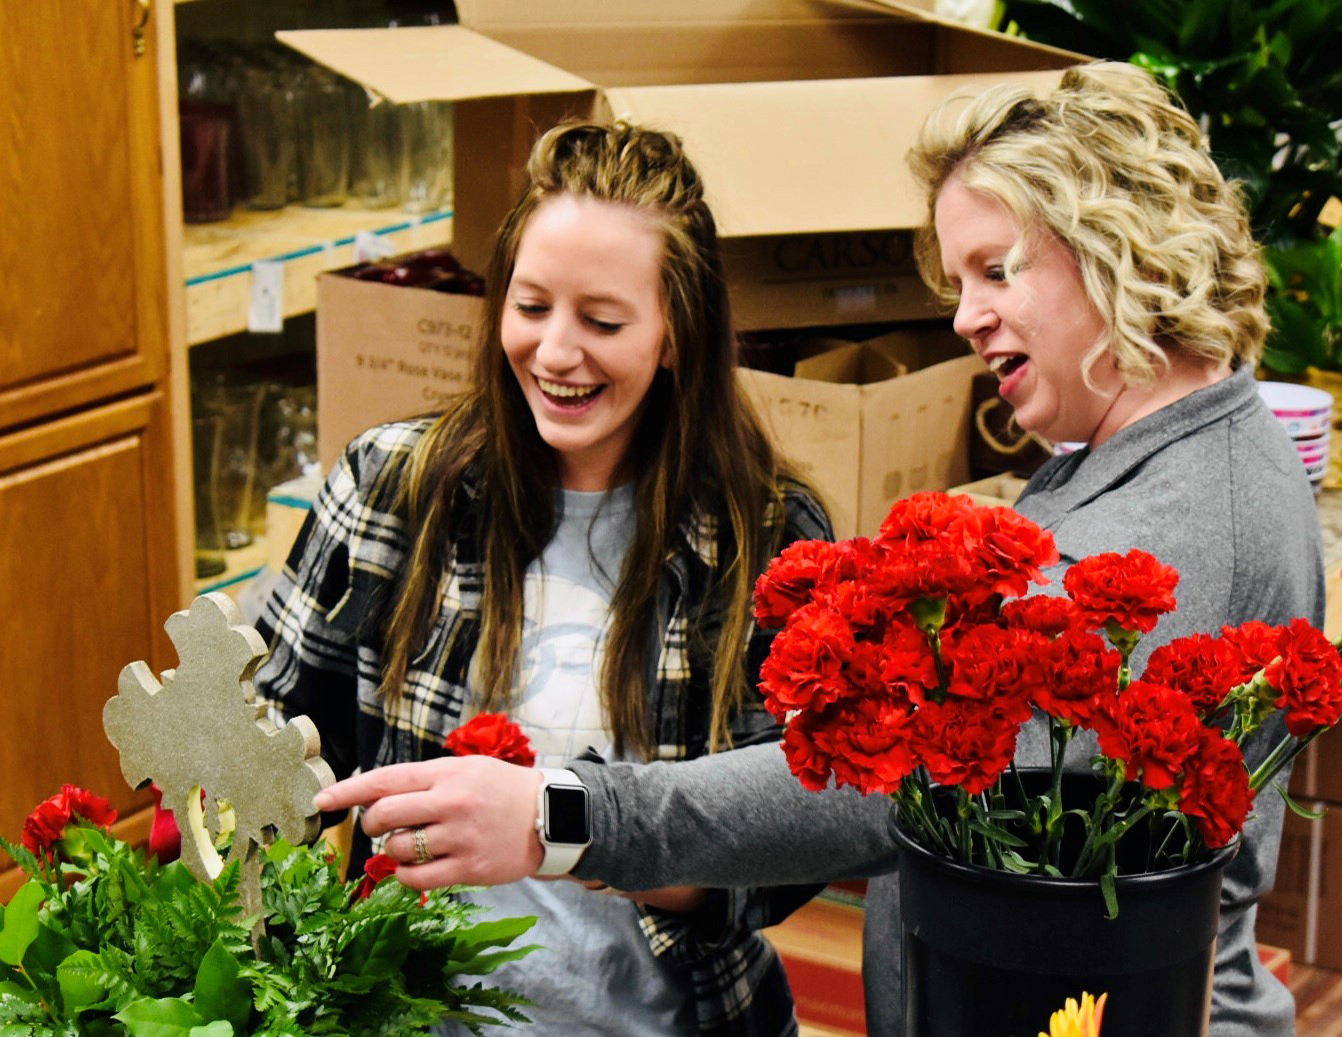 Gina and Kendra arrange red carnations and greenery around a cross